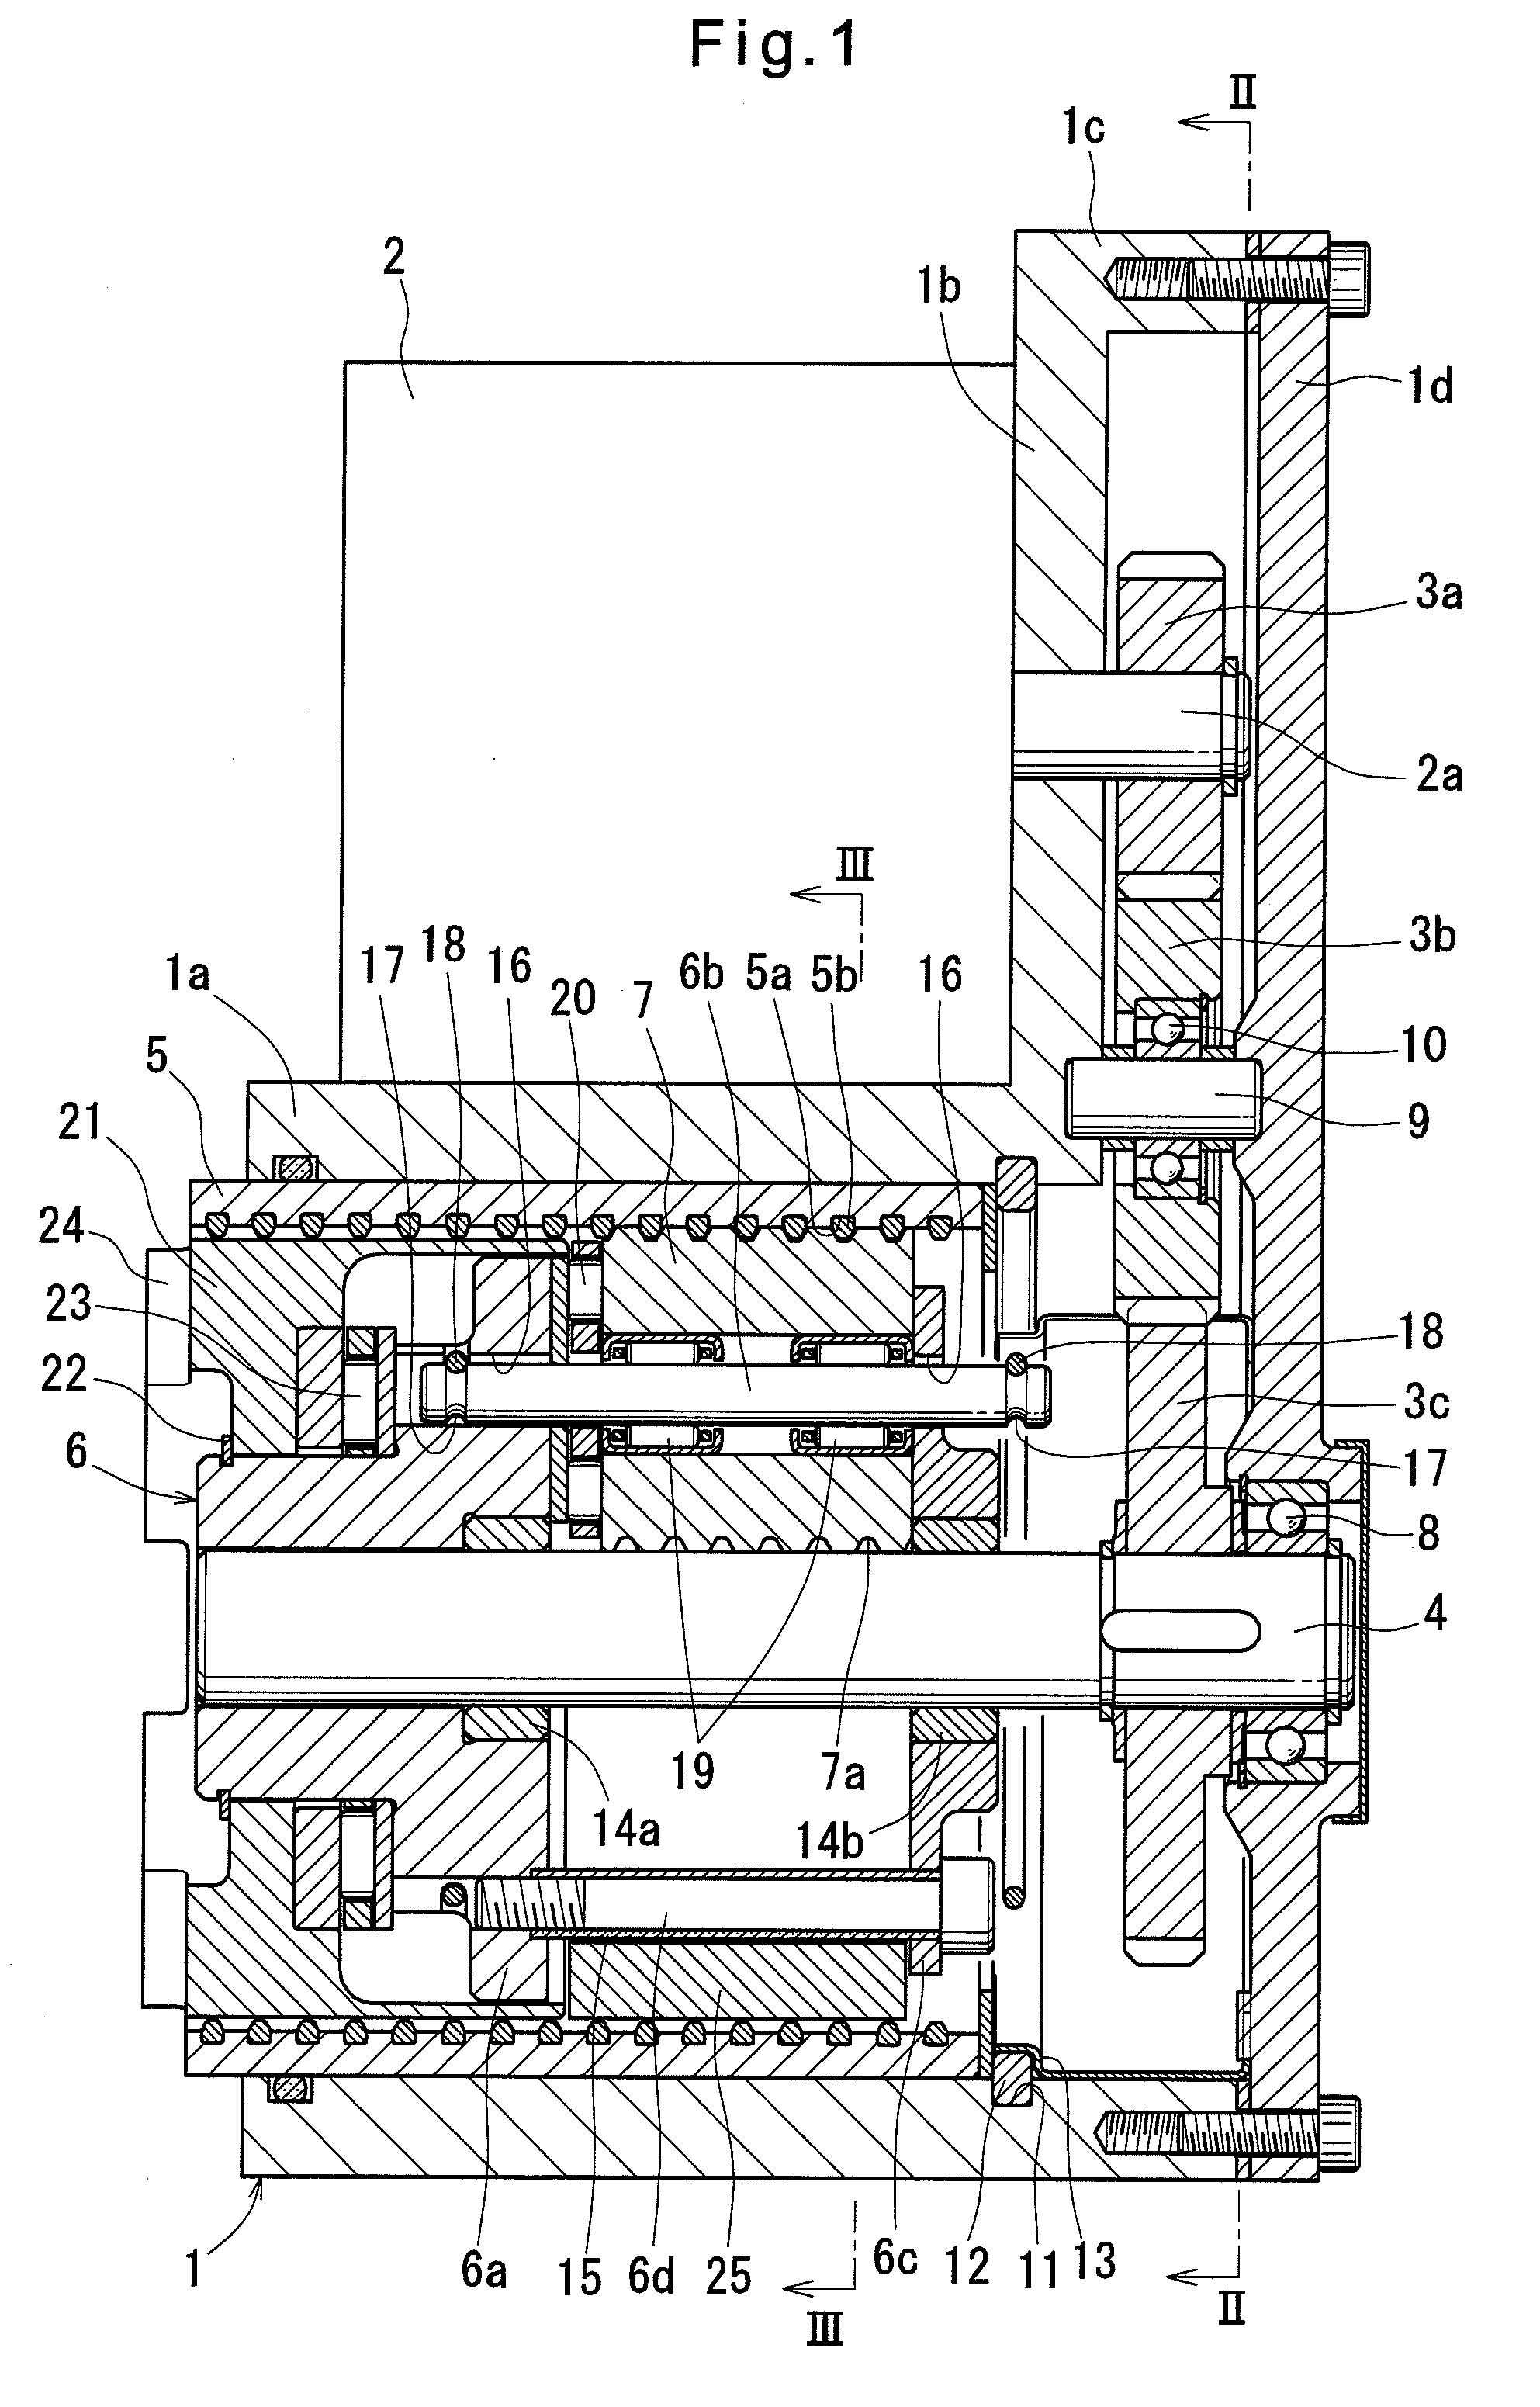 Electric linear motion actuator and electric brake assembly